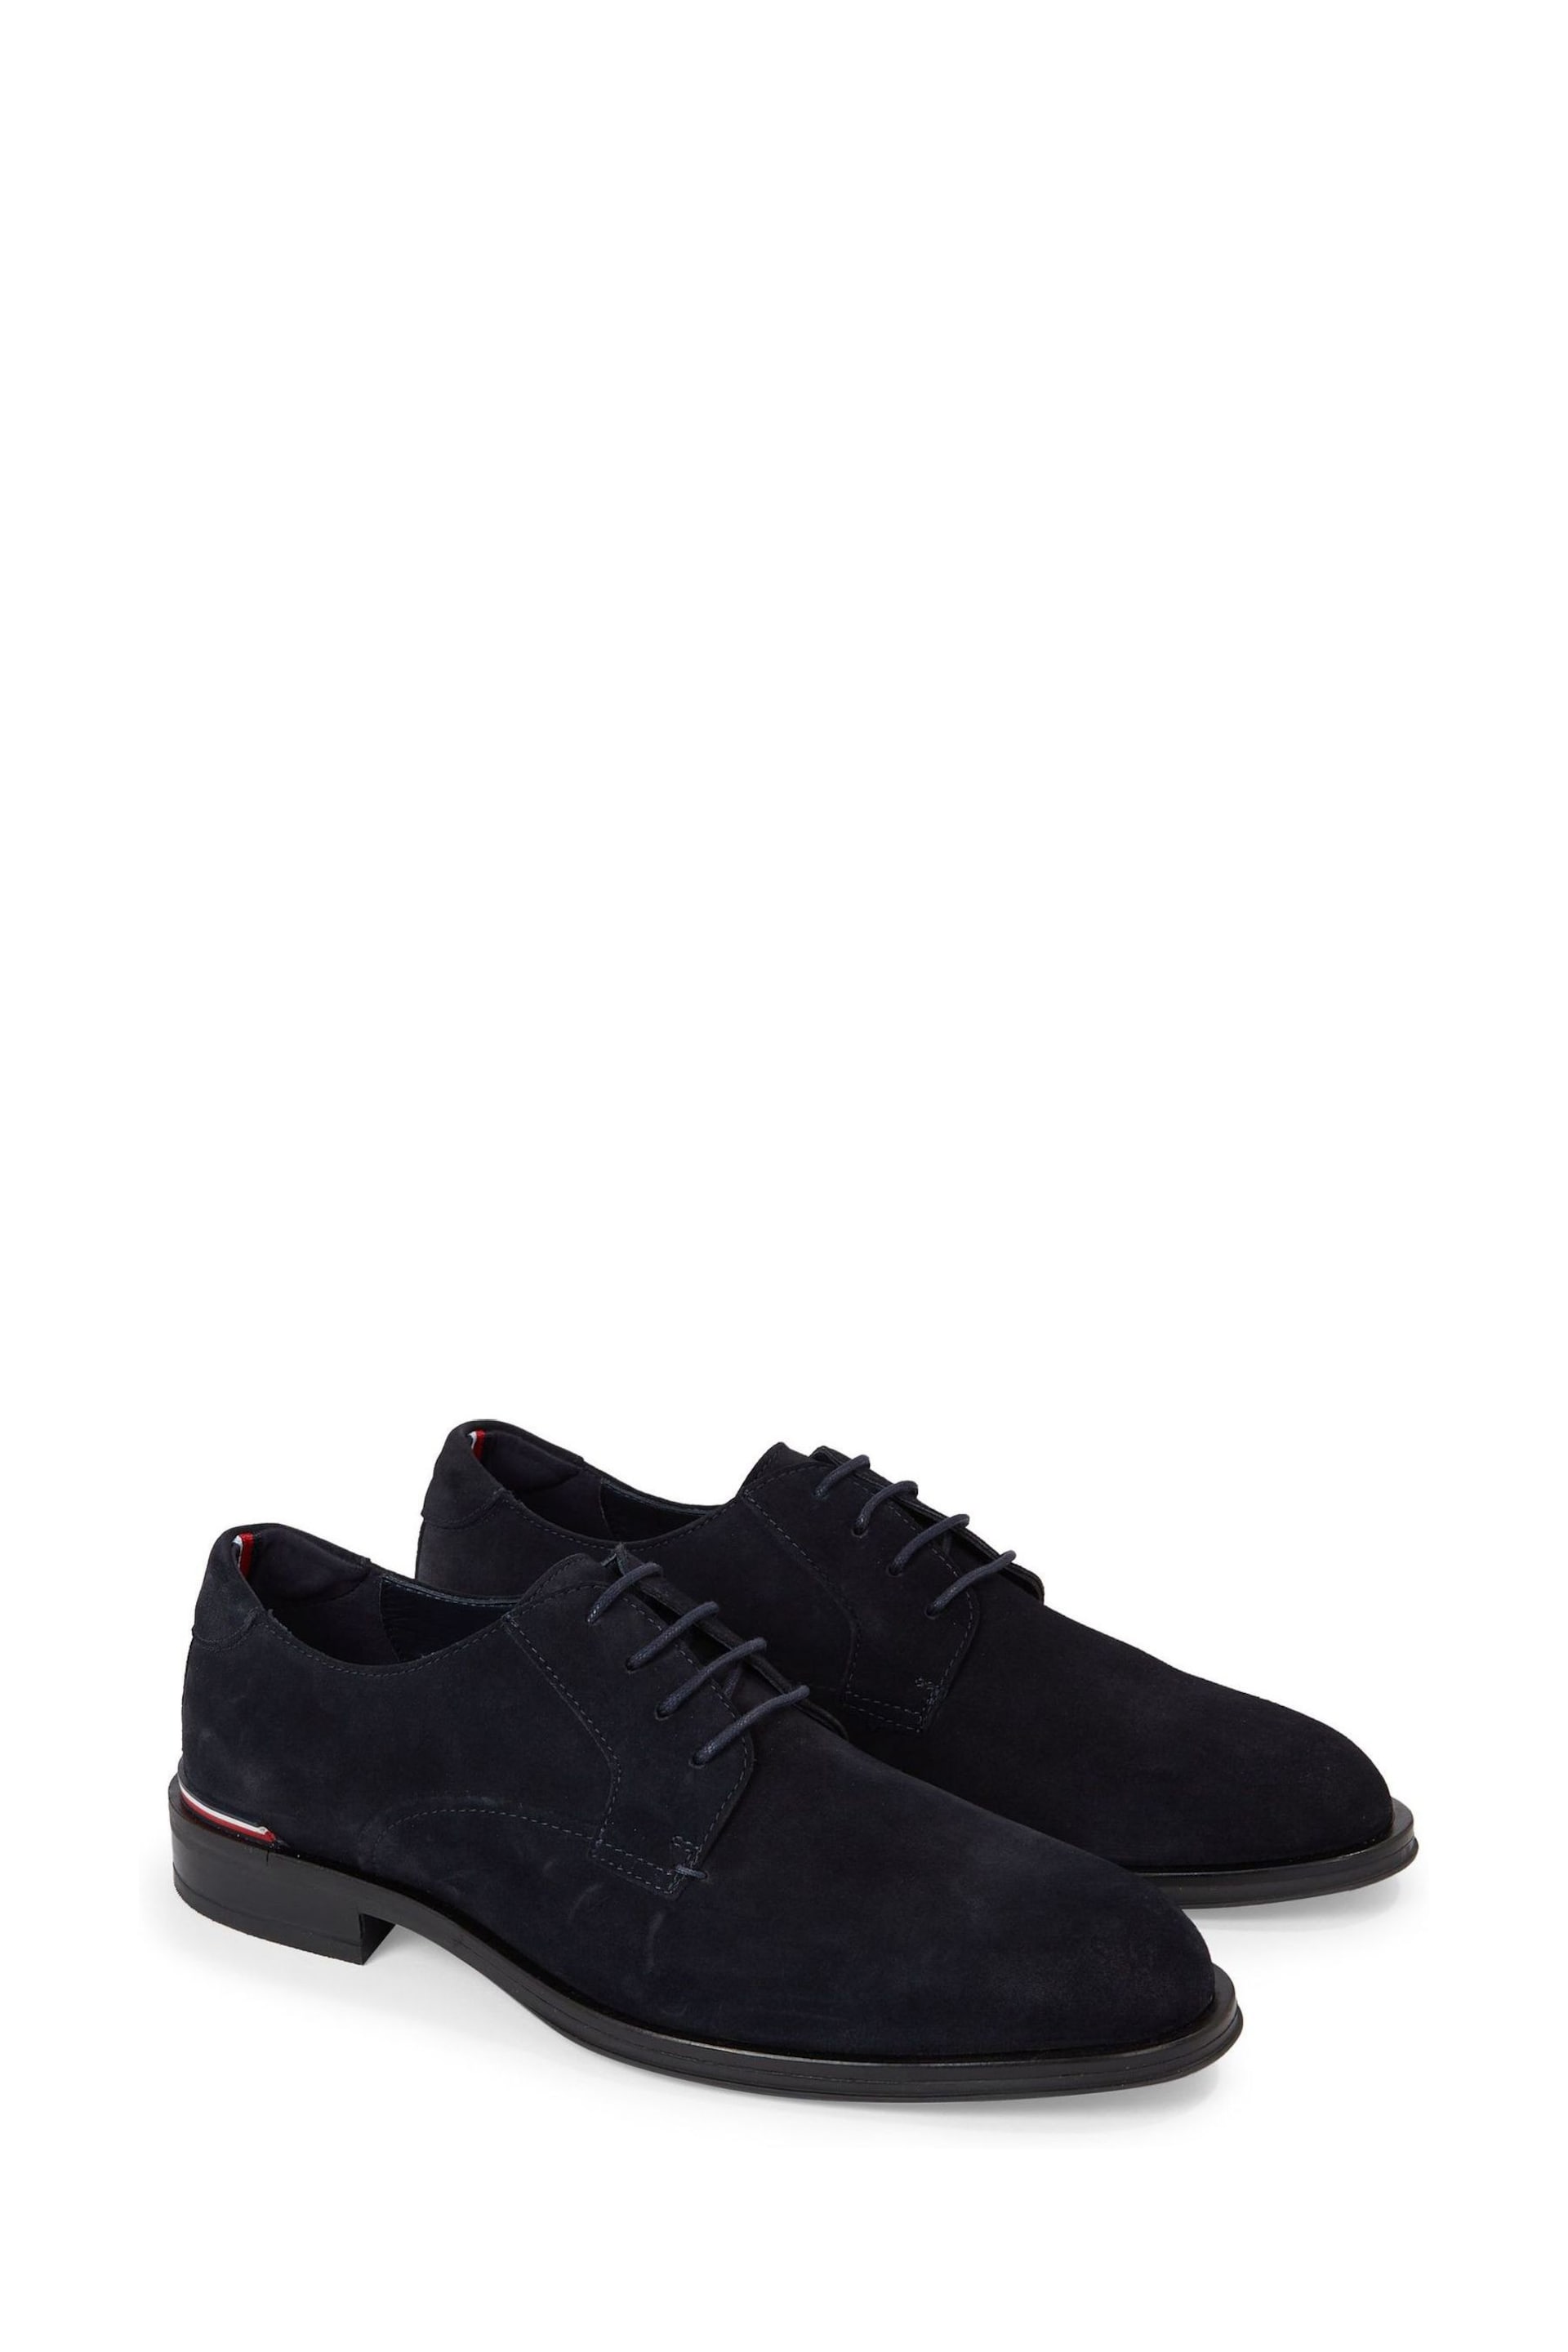 Tommy Hilfiger Blue Suede Shoes - Image 2 of 4